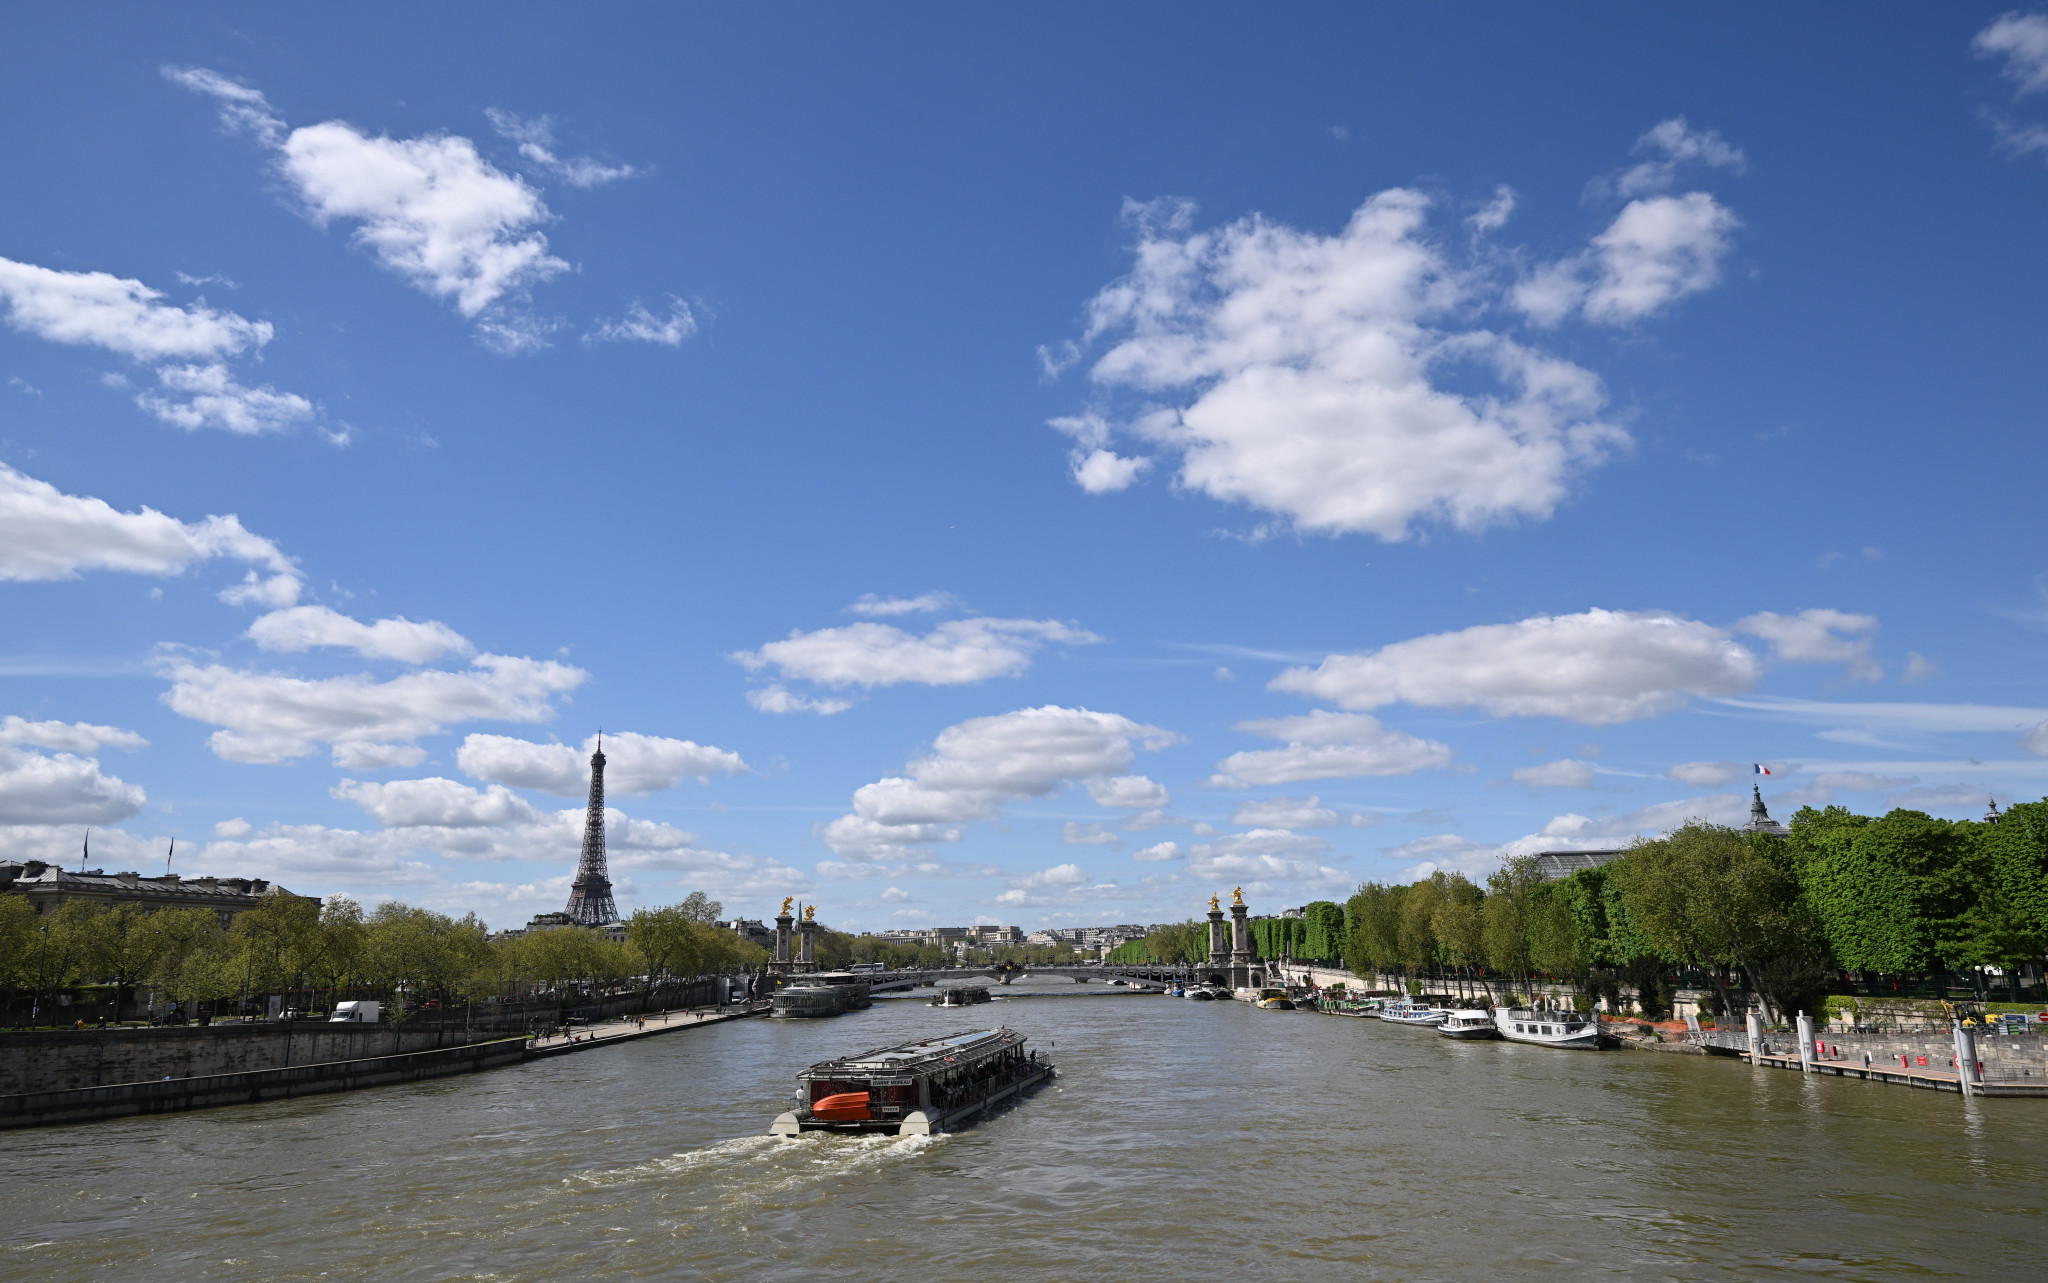 The opening ceremony will take place along the River Seine. GETTY IMAGES